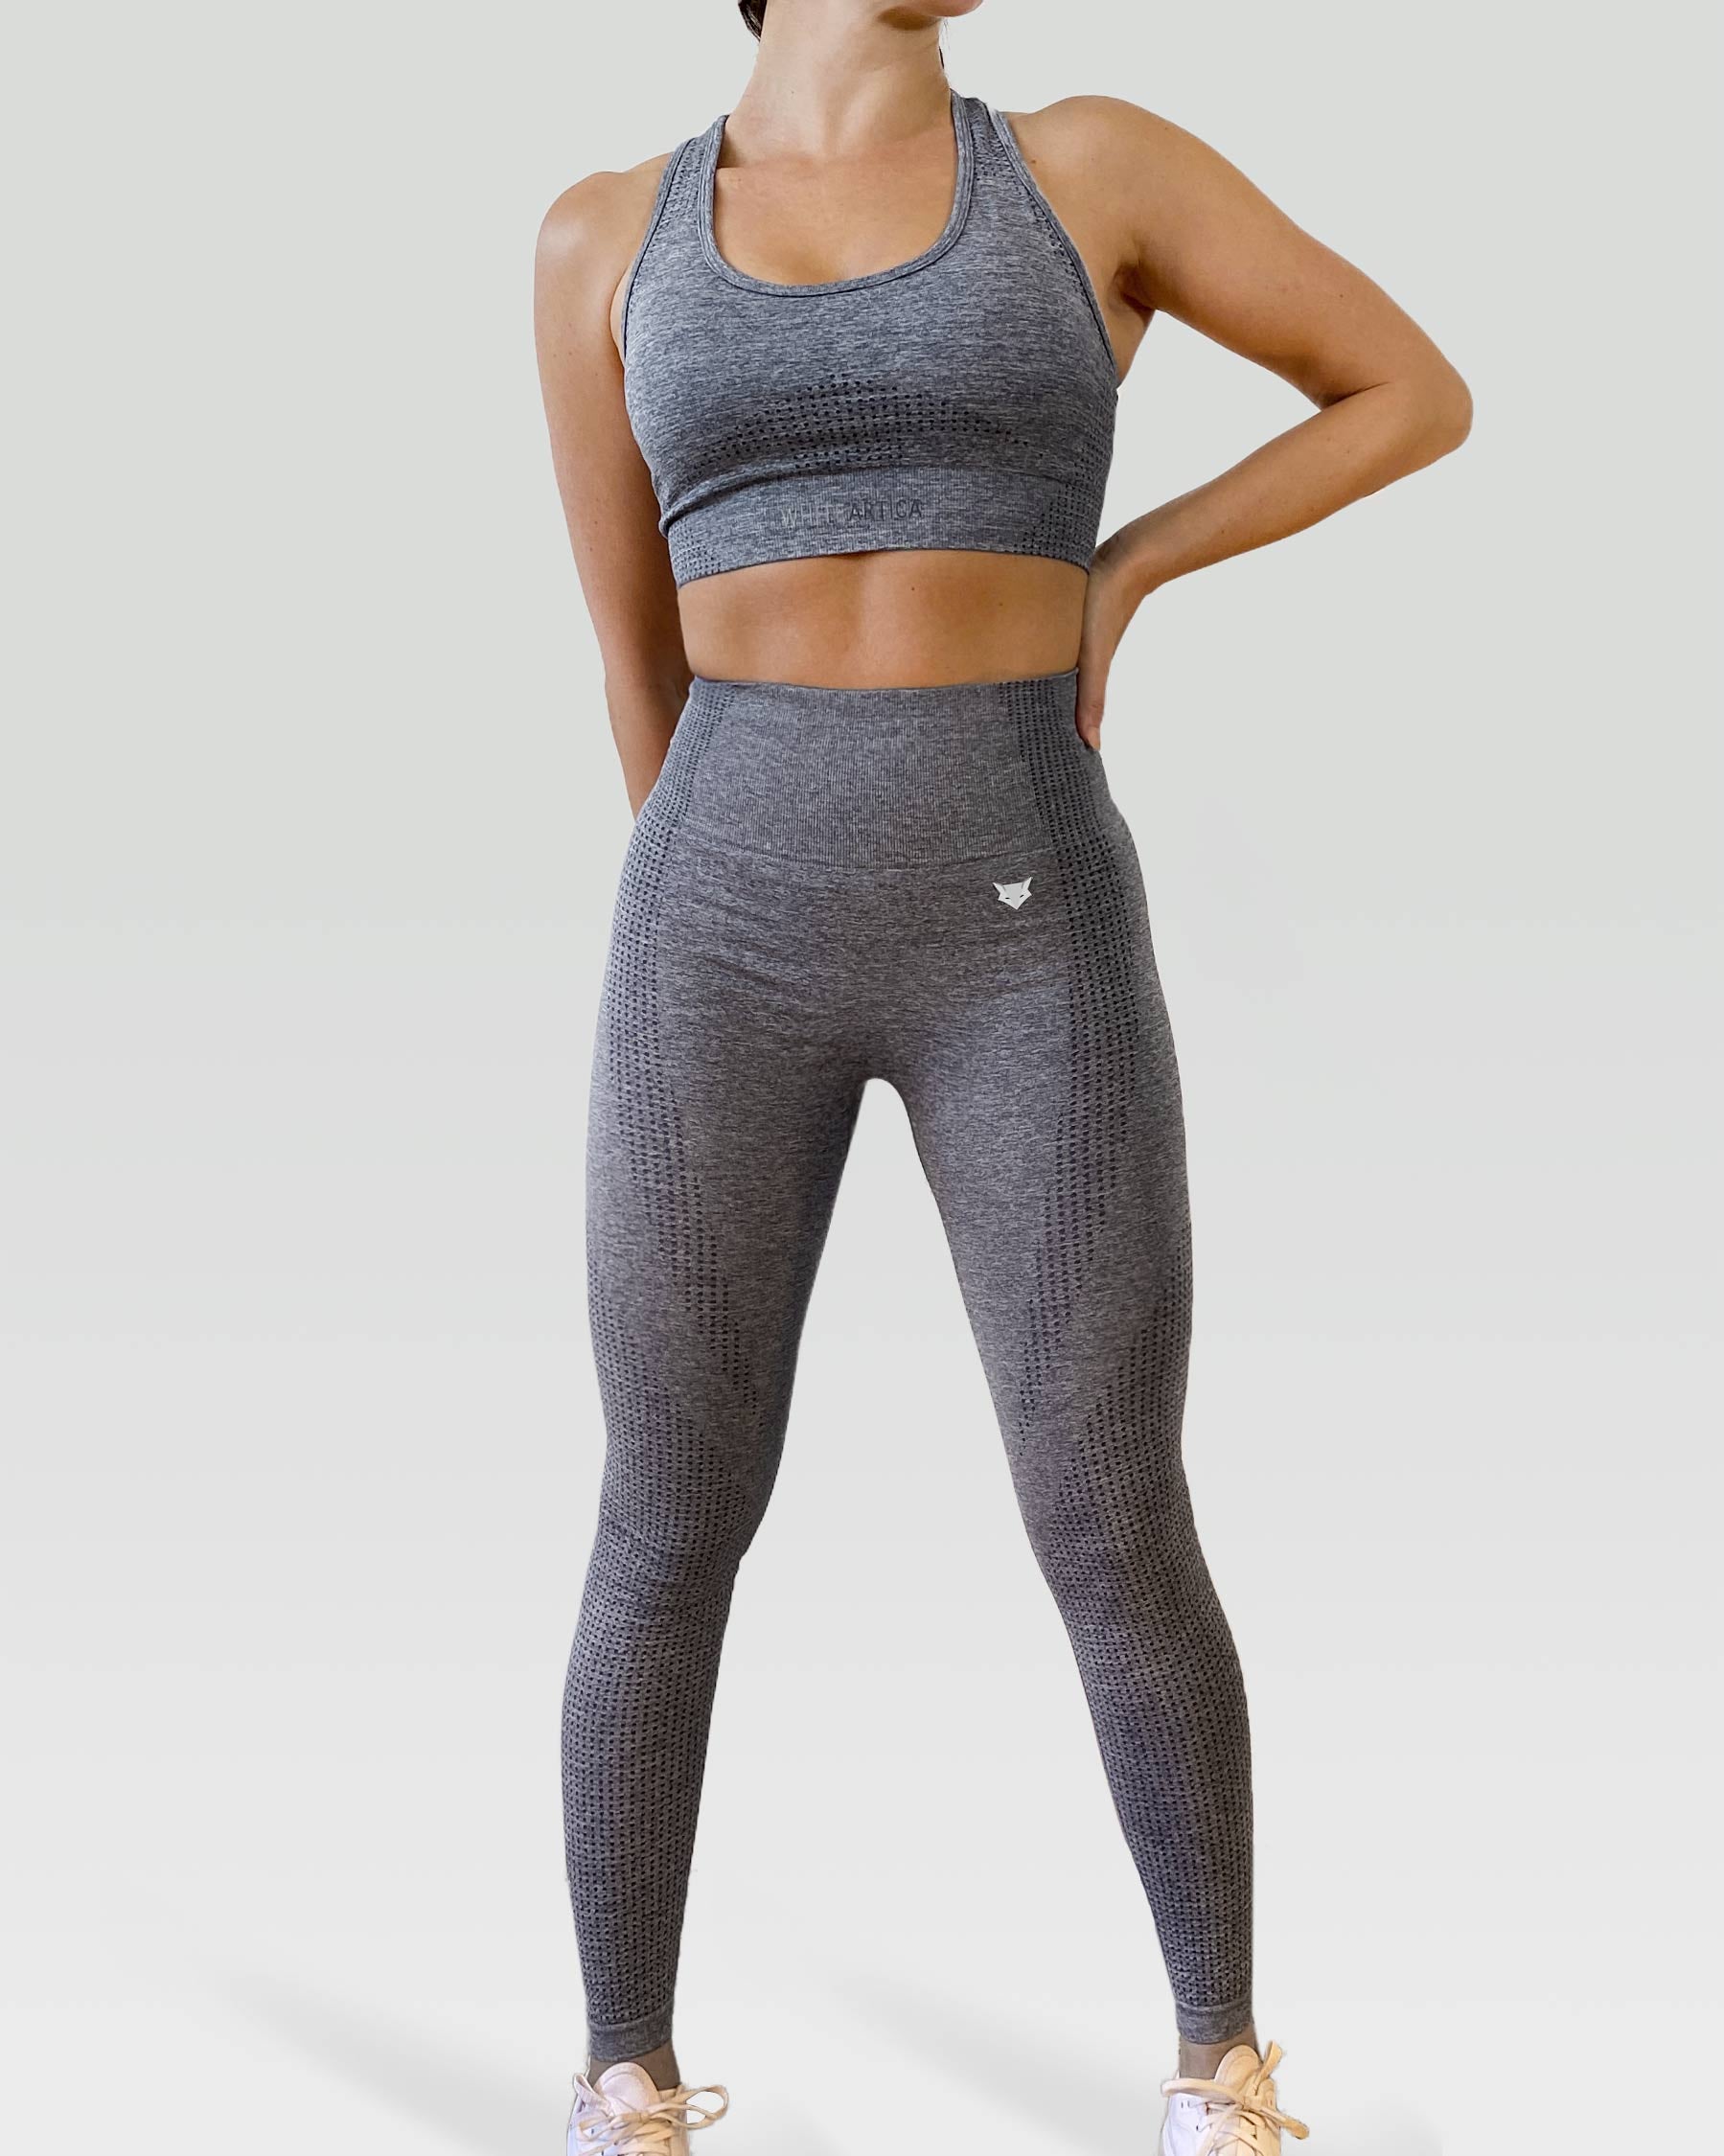 Australian woman wearing white artica high-waisted exercise pants and leggings activewear for her activewear workout fitness cloths